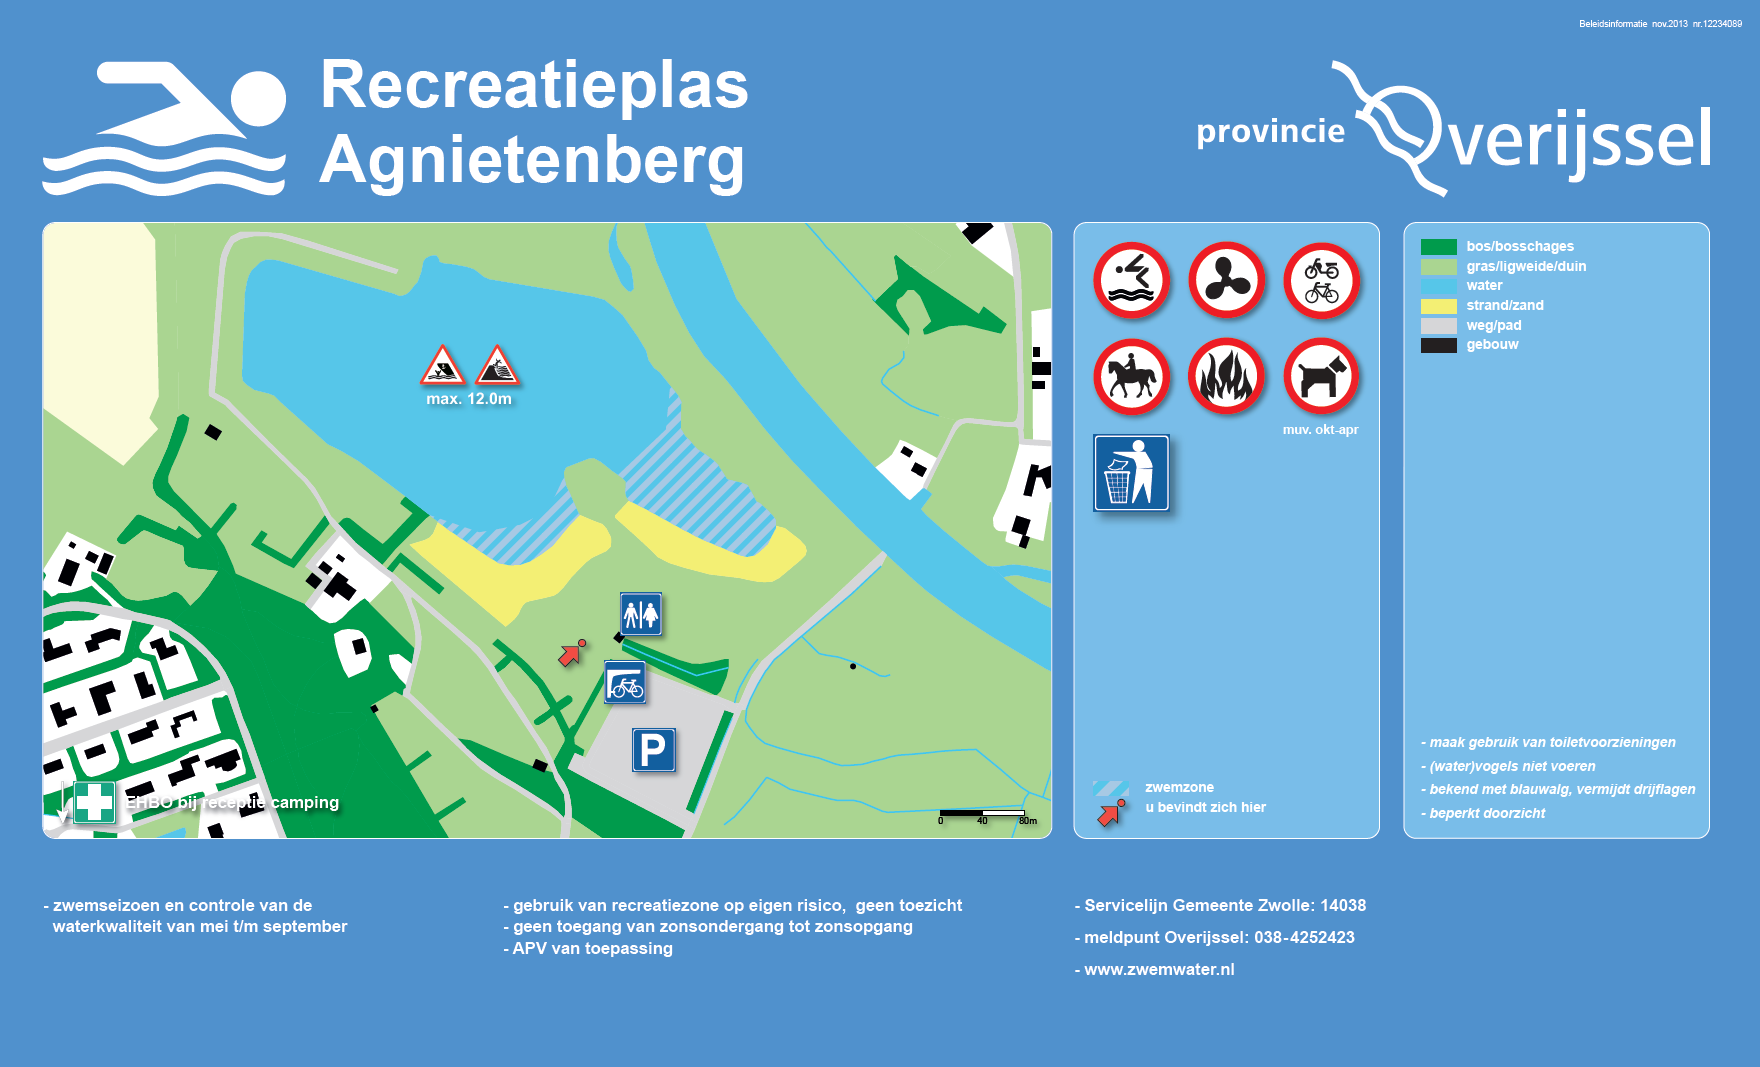 The information board at the swimming location Agnietenplas West